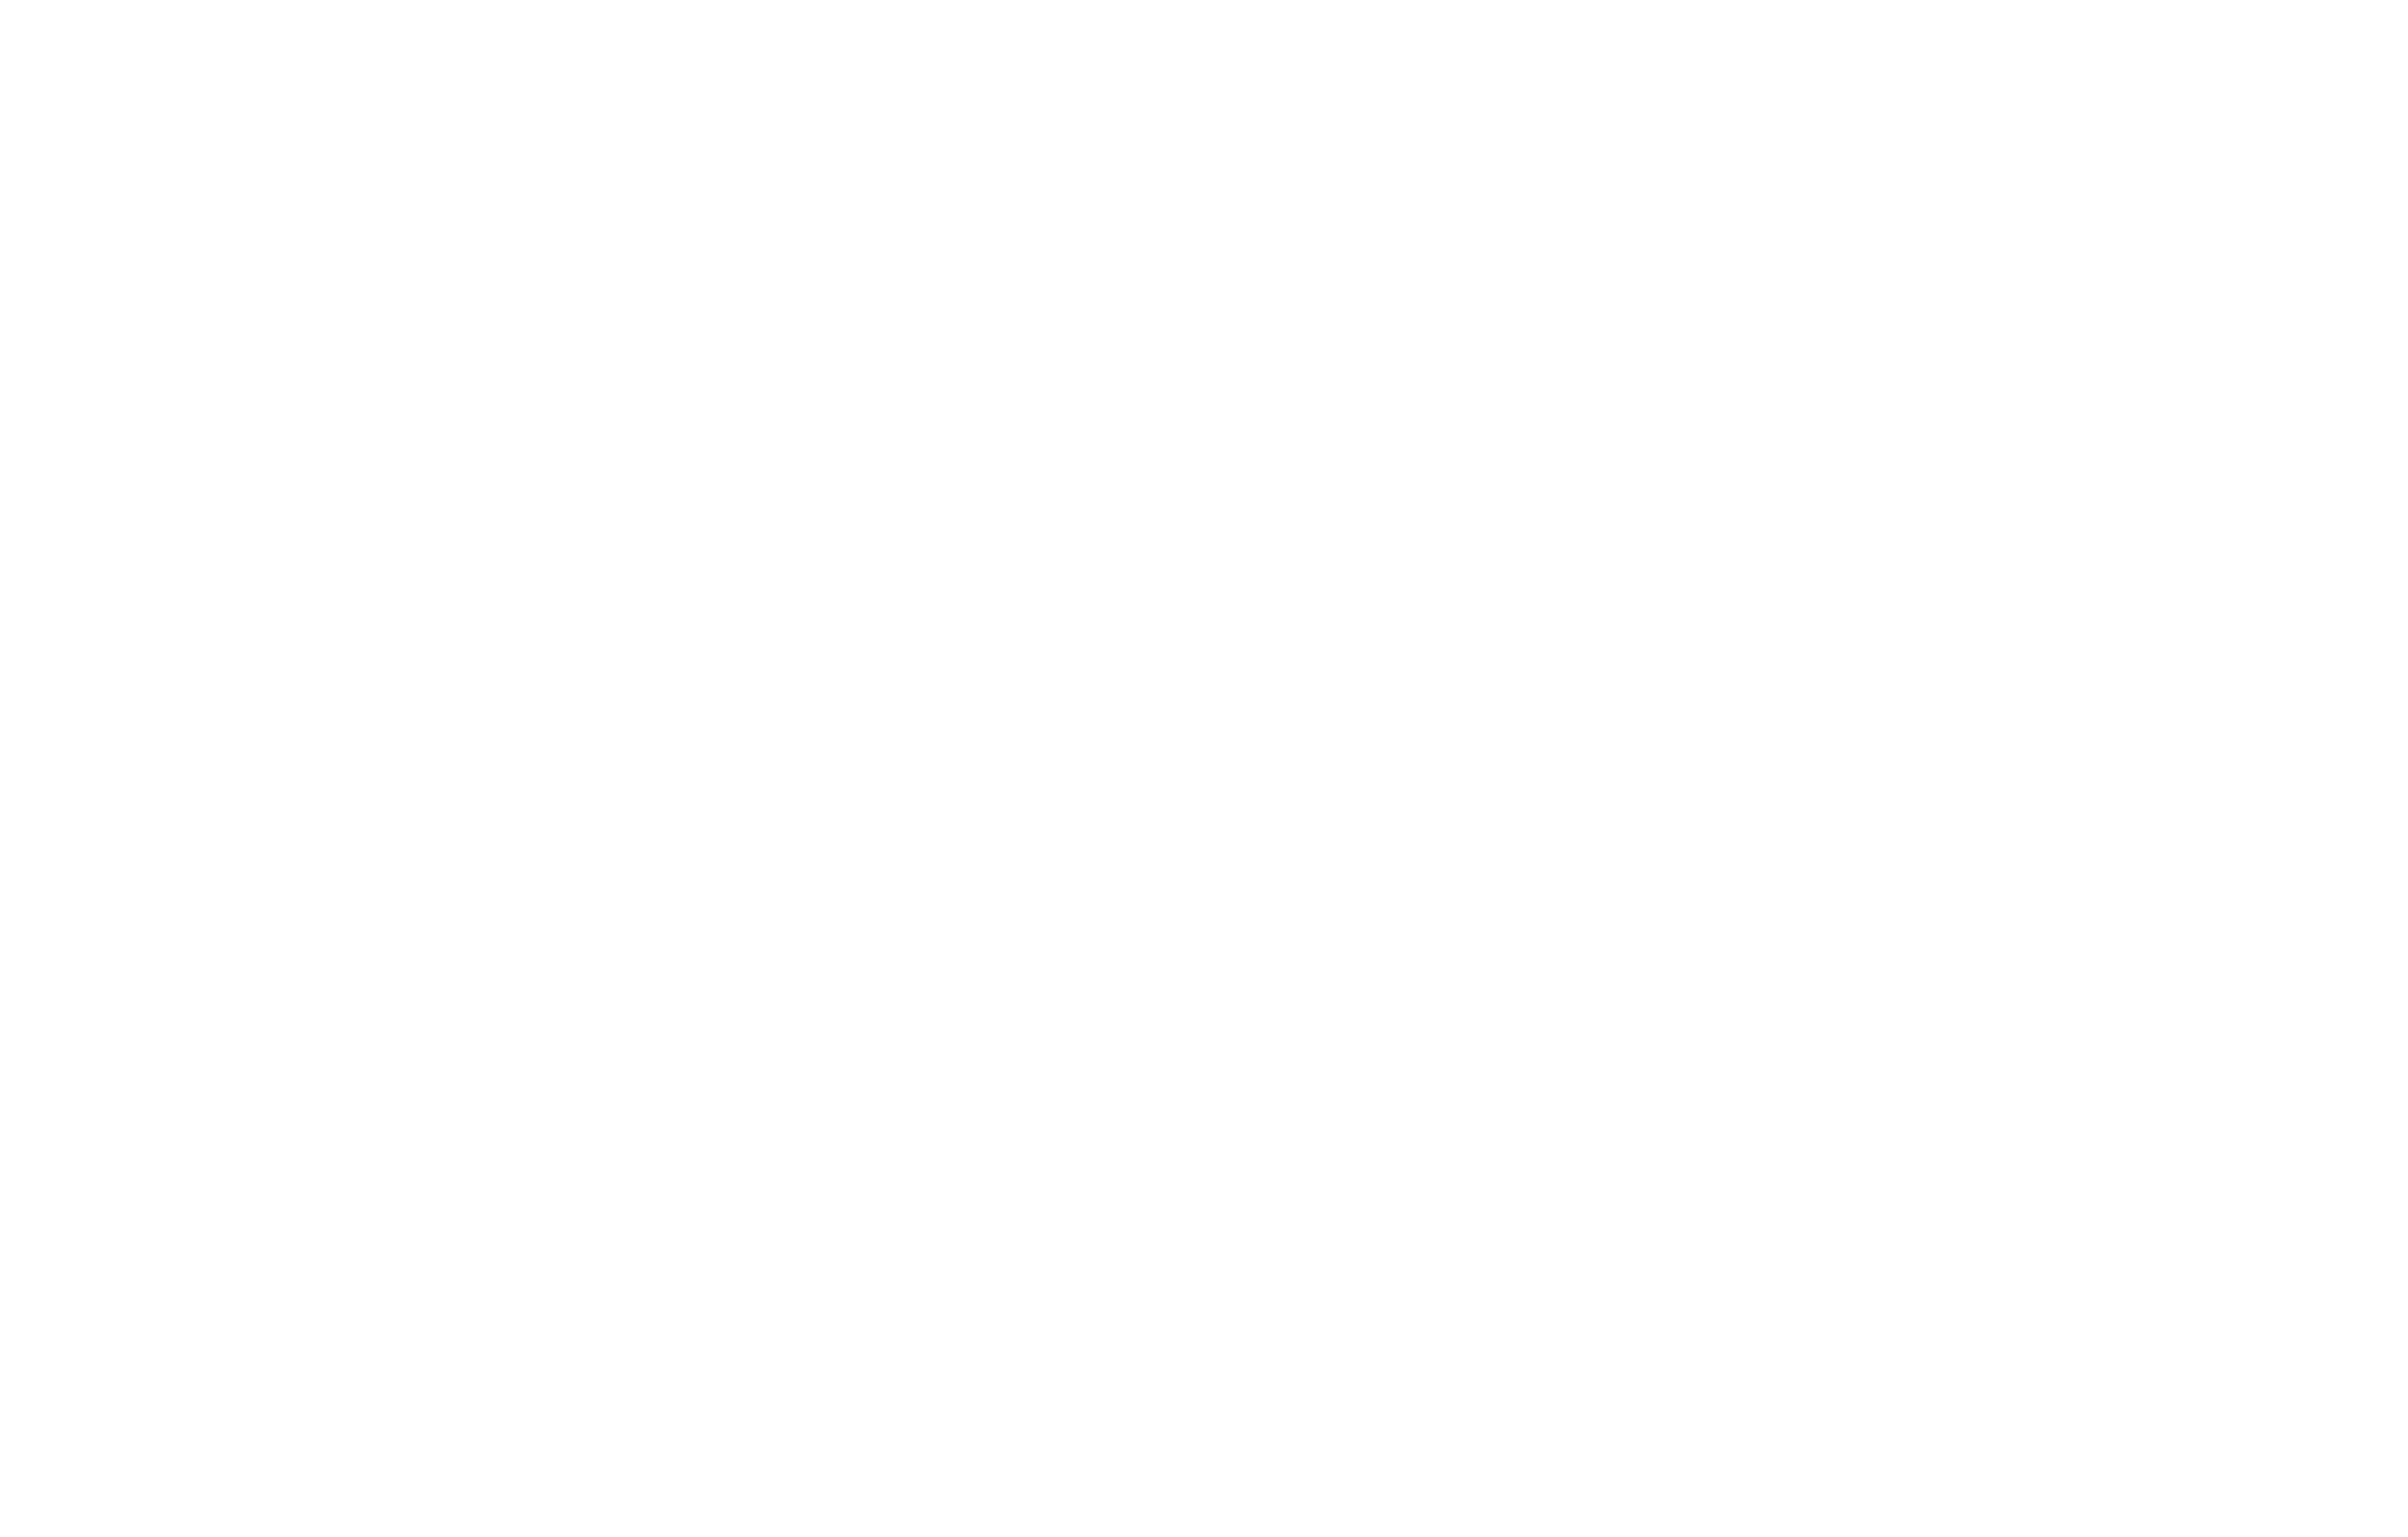 Together, here at the end